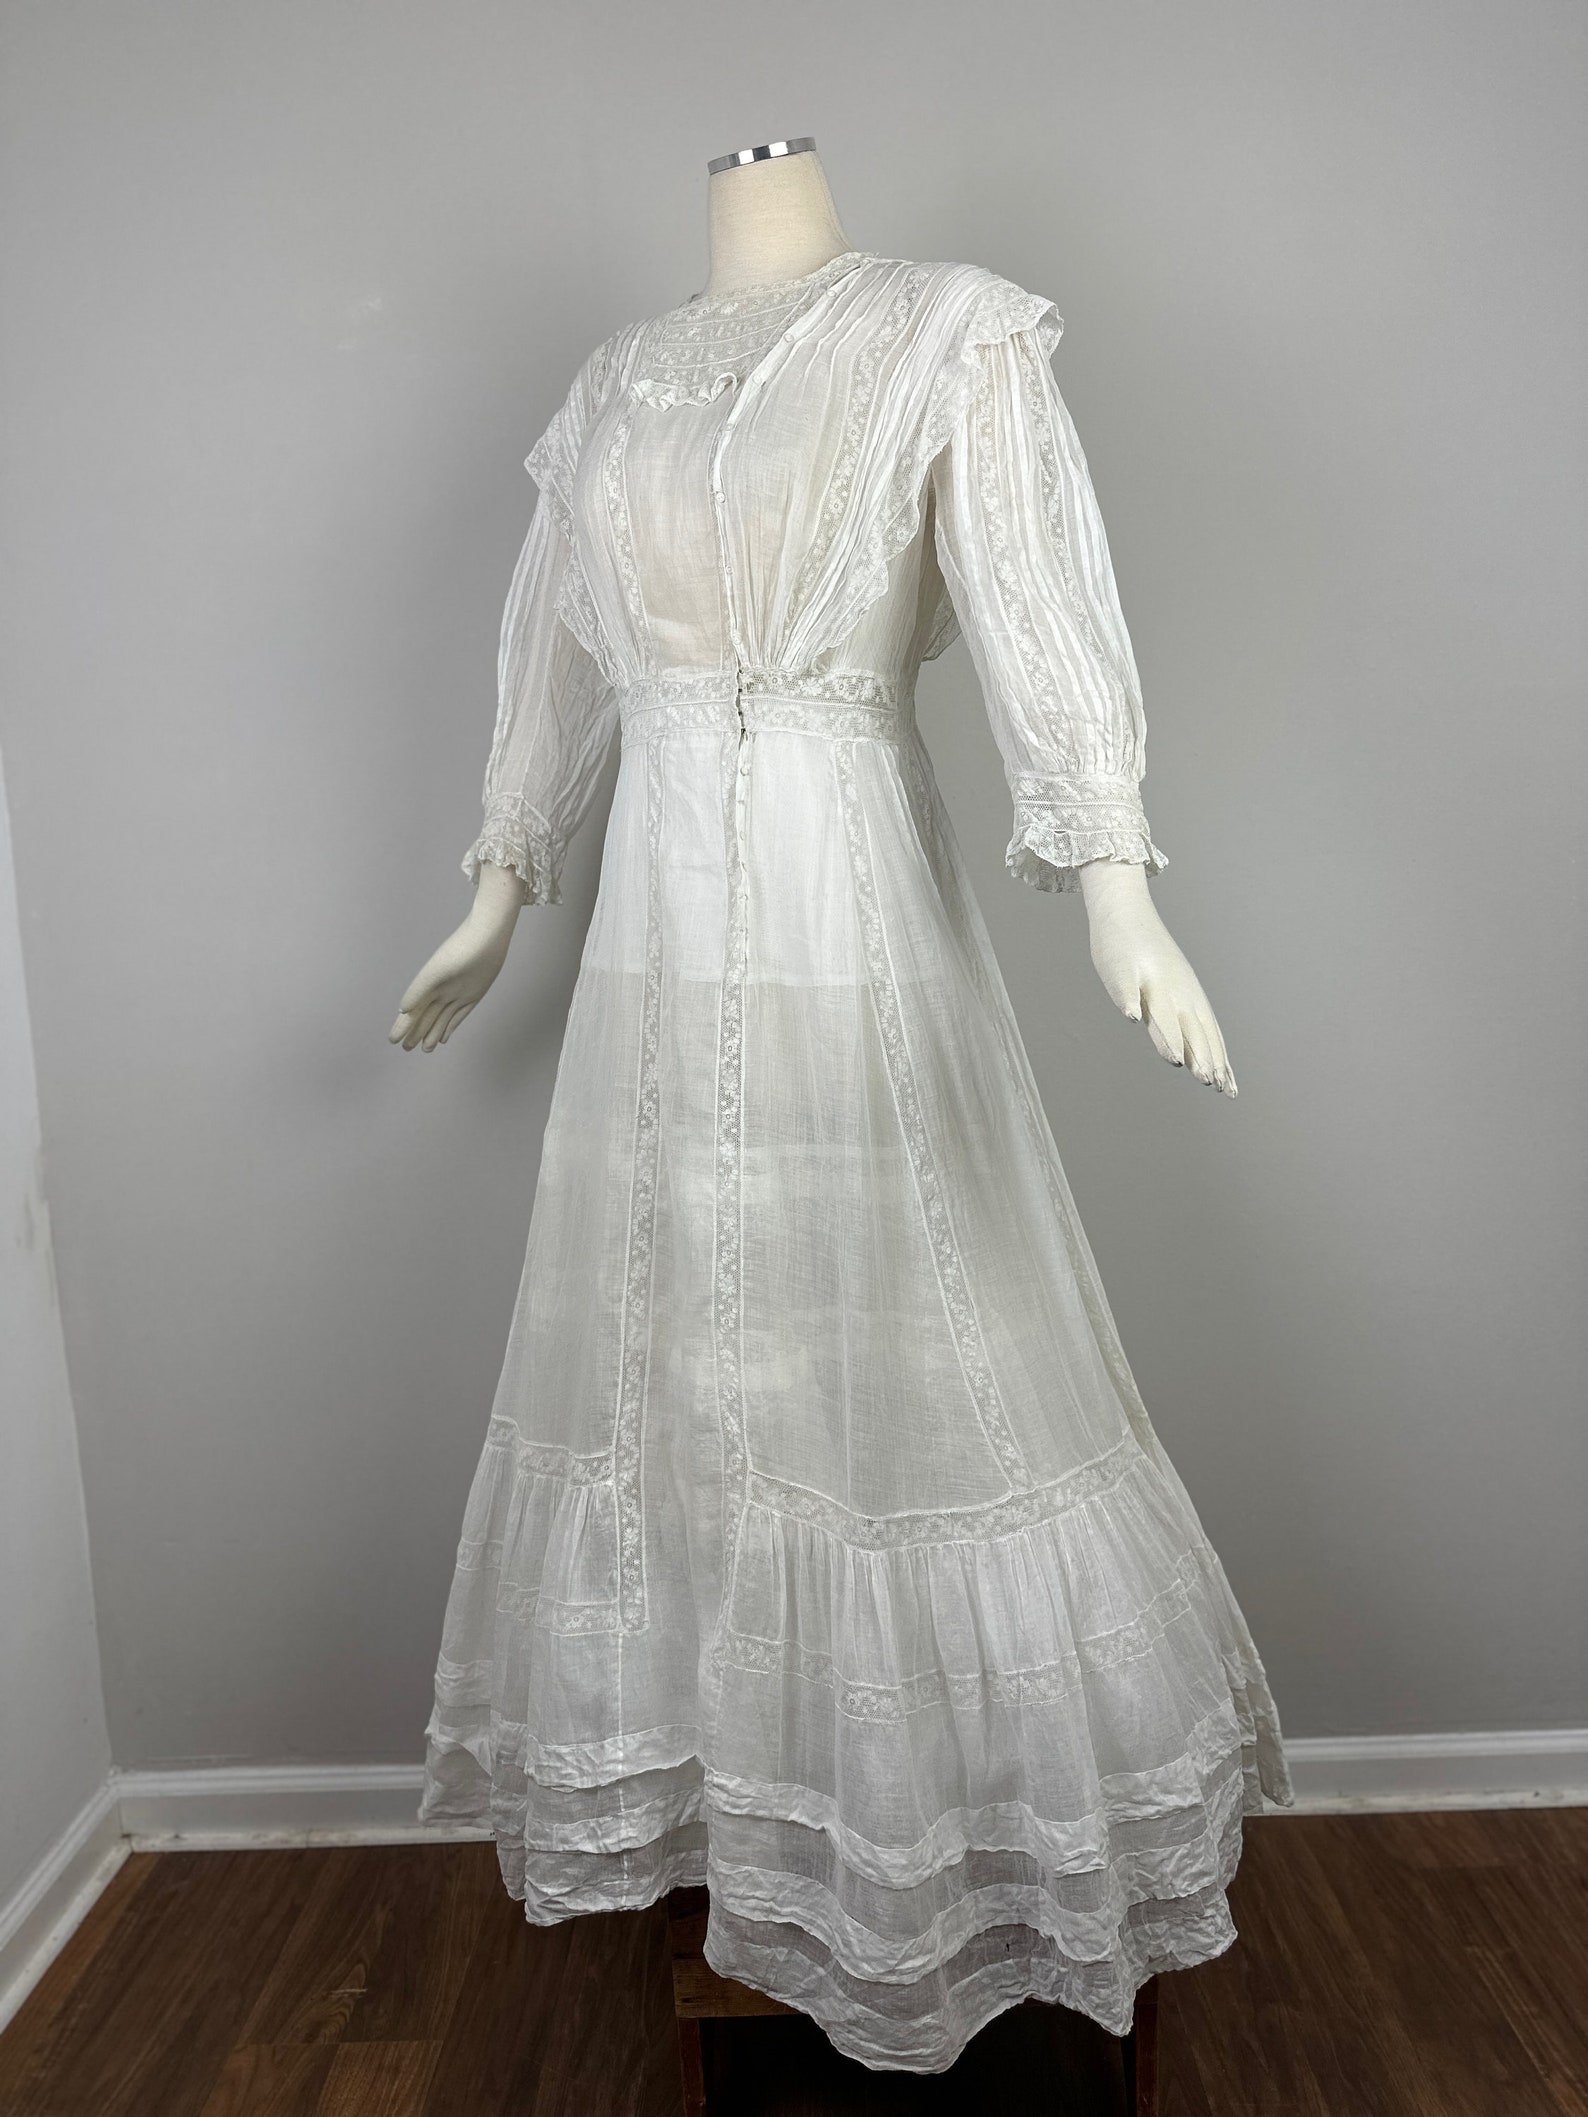 Antique Edwardian Dress 1910s Wedding Gown Tiered With Fancy Net Lace ...